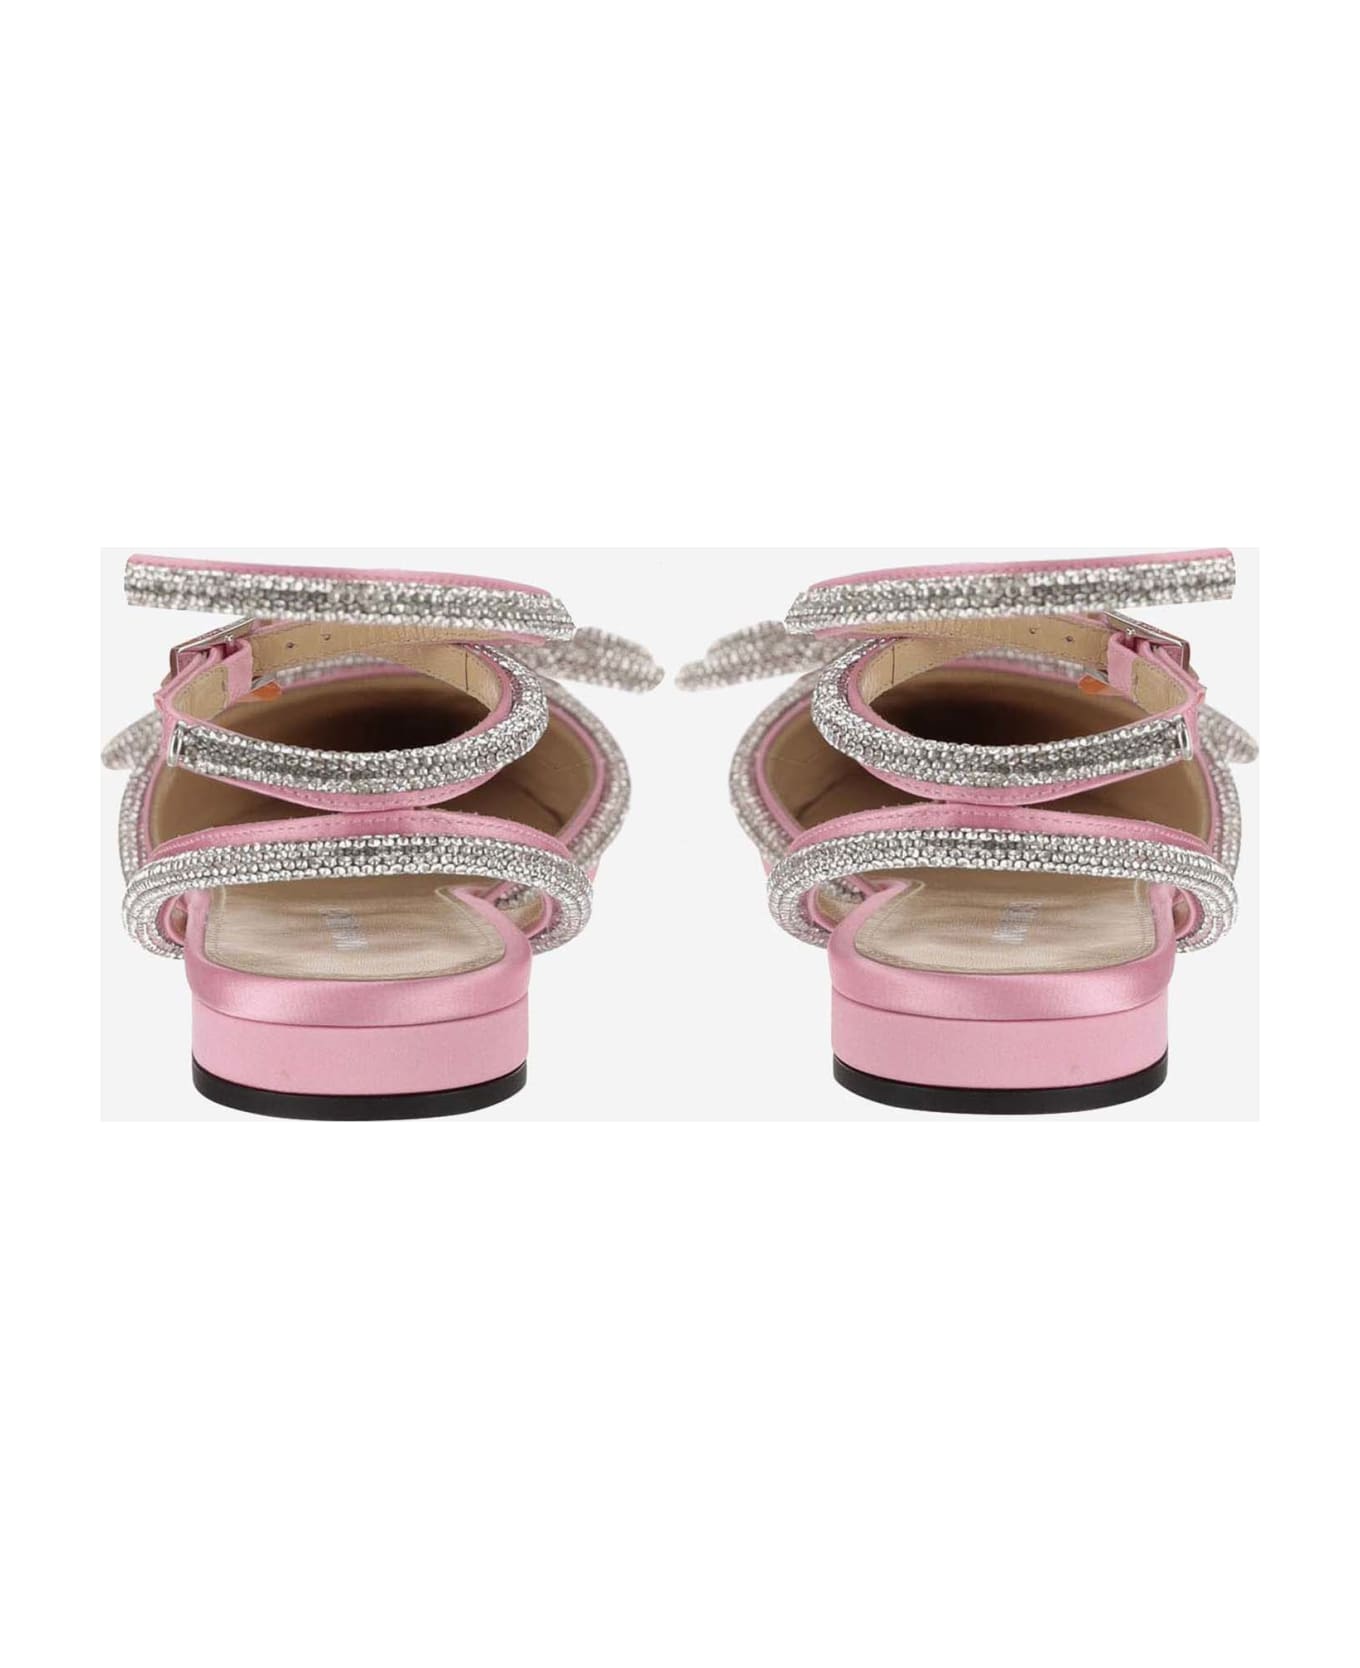 Mach & Mach Silk Slingback With Bow - Pink フラットシューズ